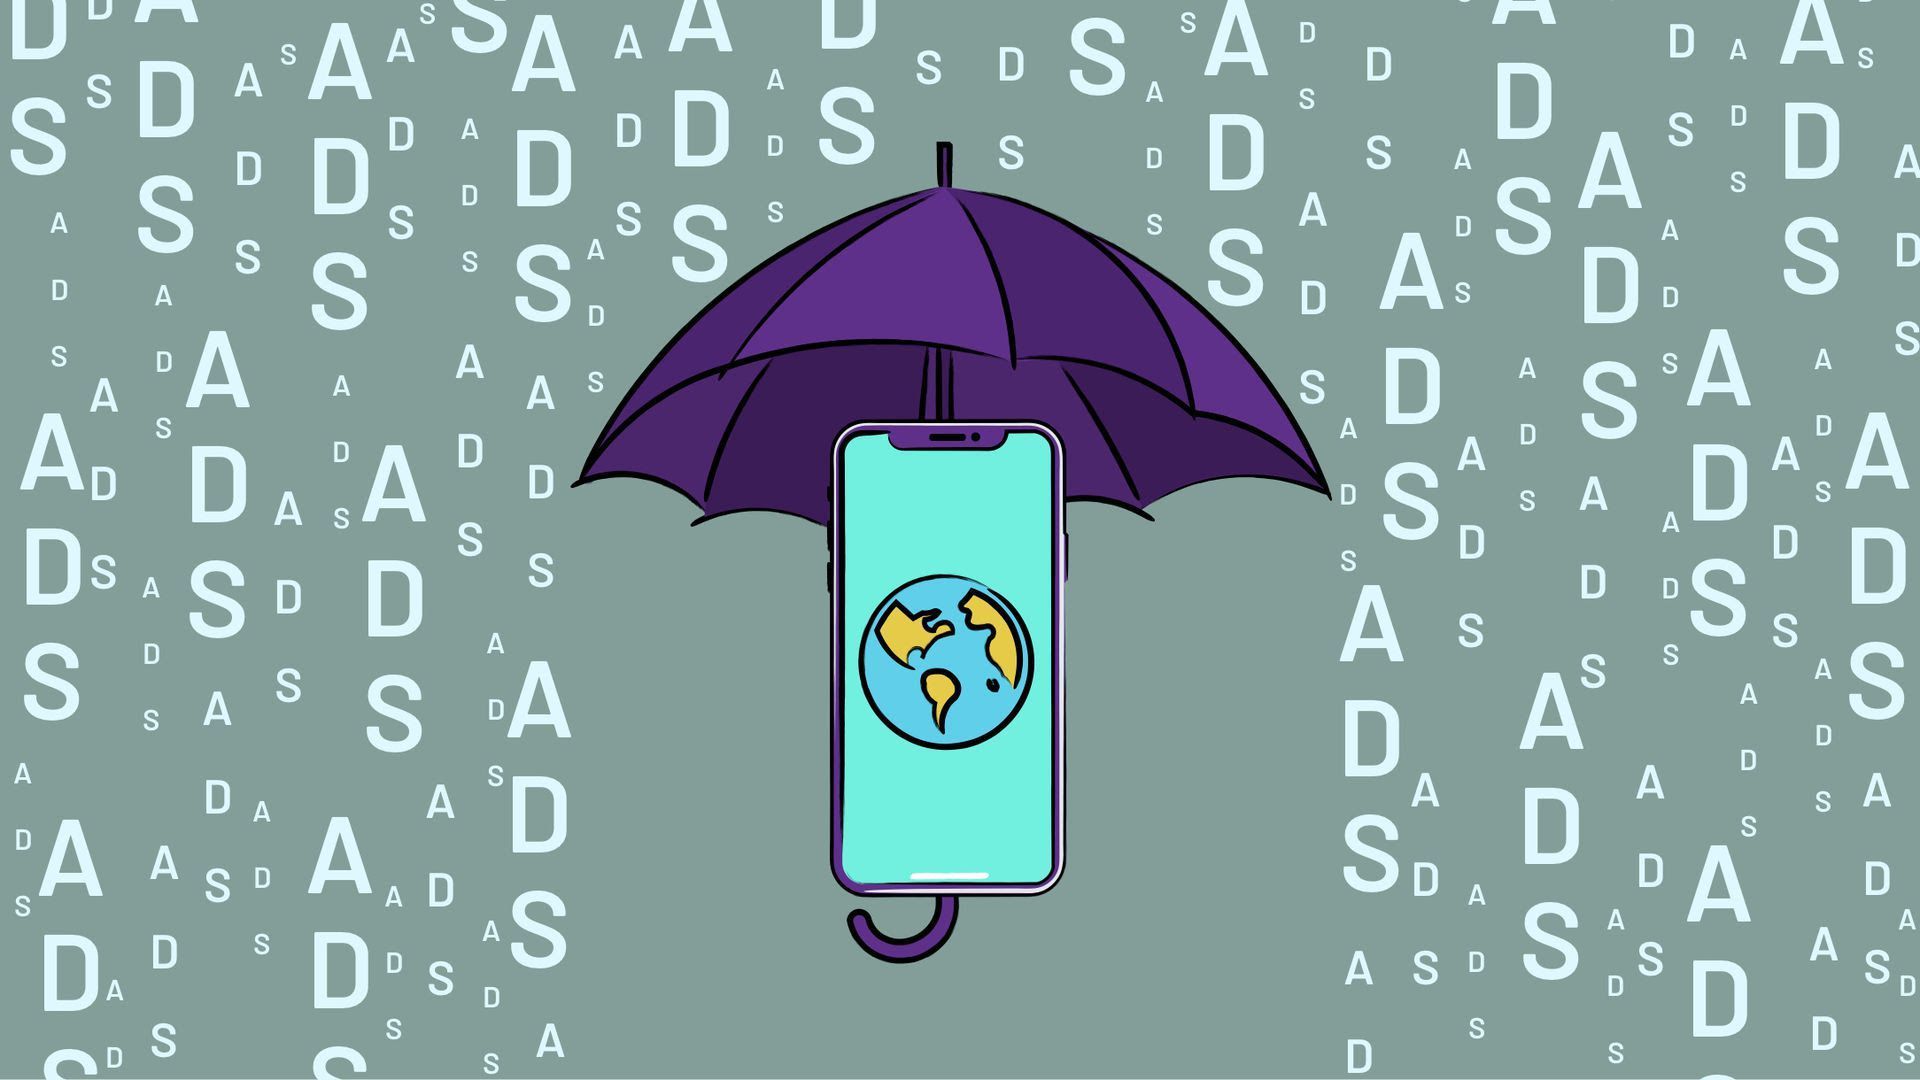 An illustration with an image of a globe on a smartphone under an umbrella while the word "ads" rains down.